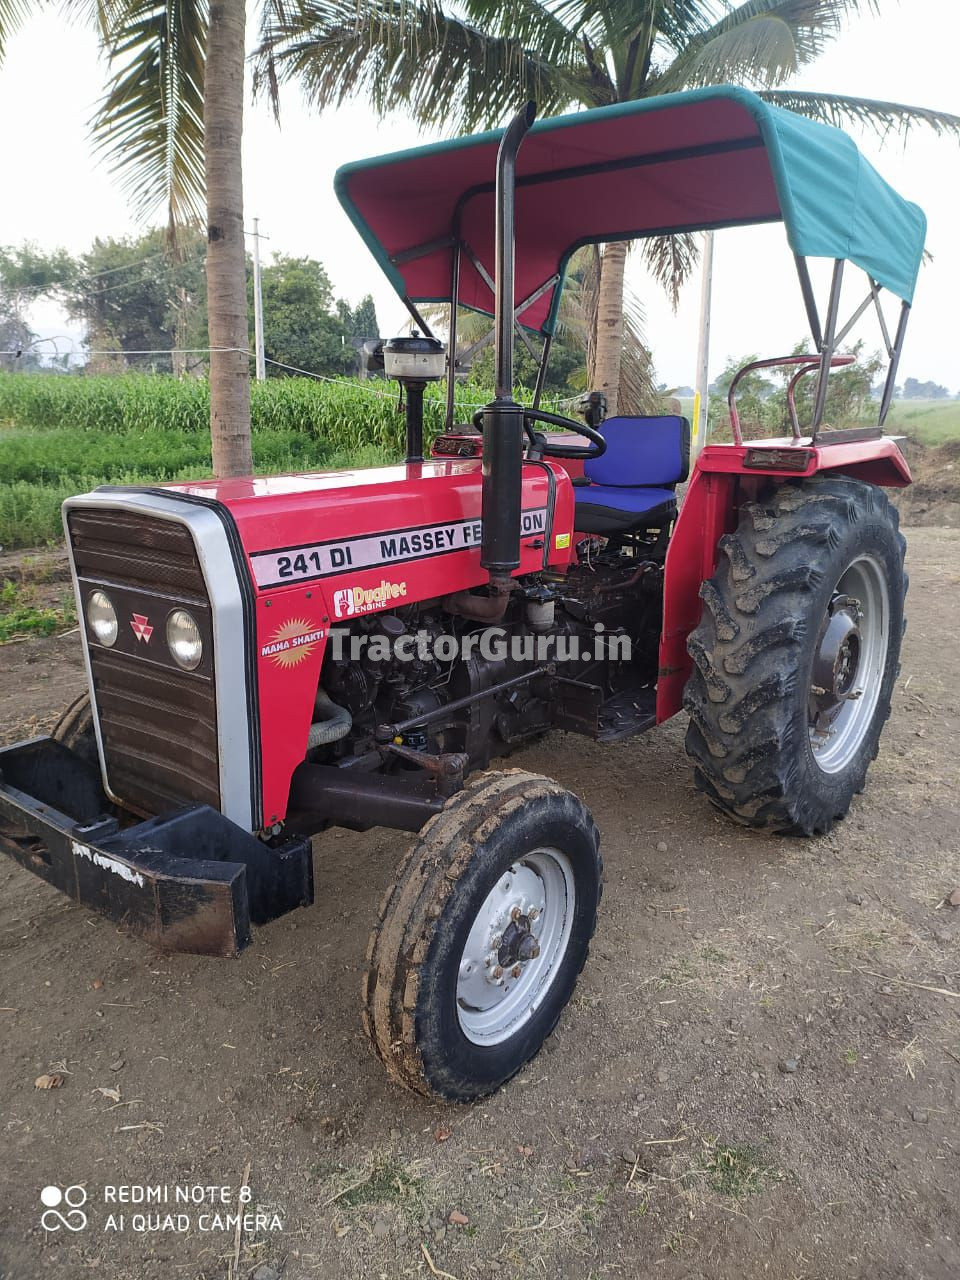 Get Second Hand Massey Ferguson 241 DI Tractor in Good Condition - 6578